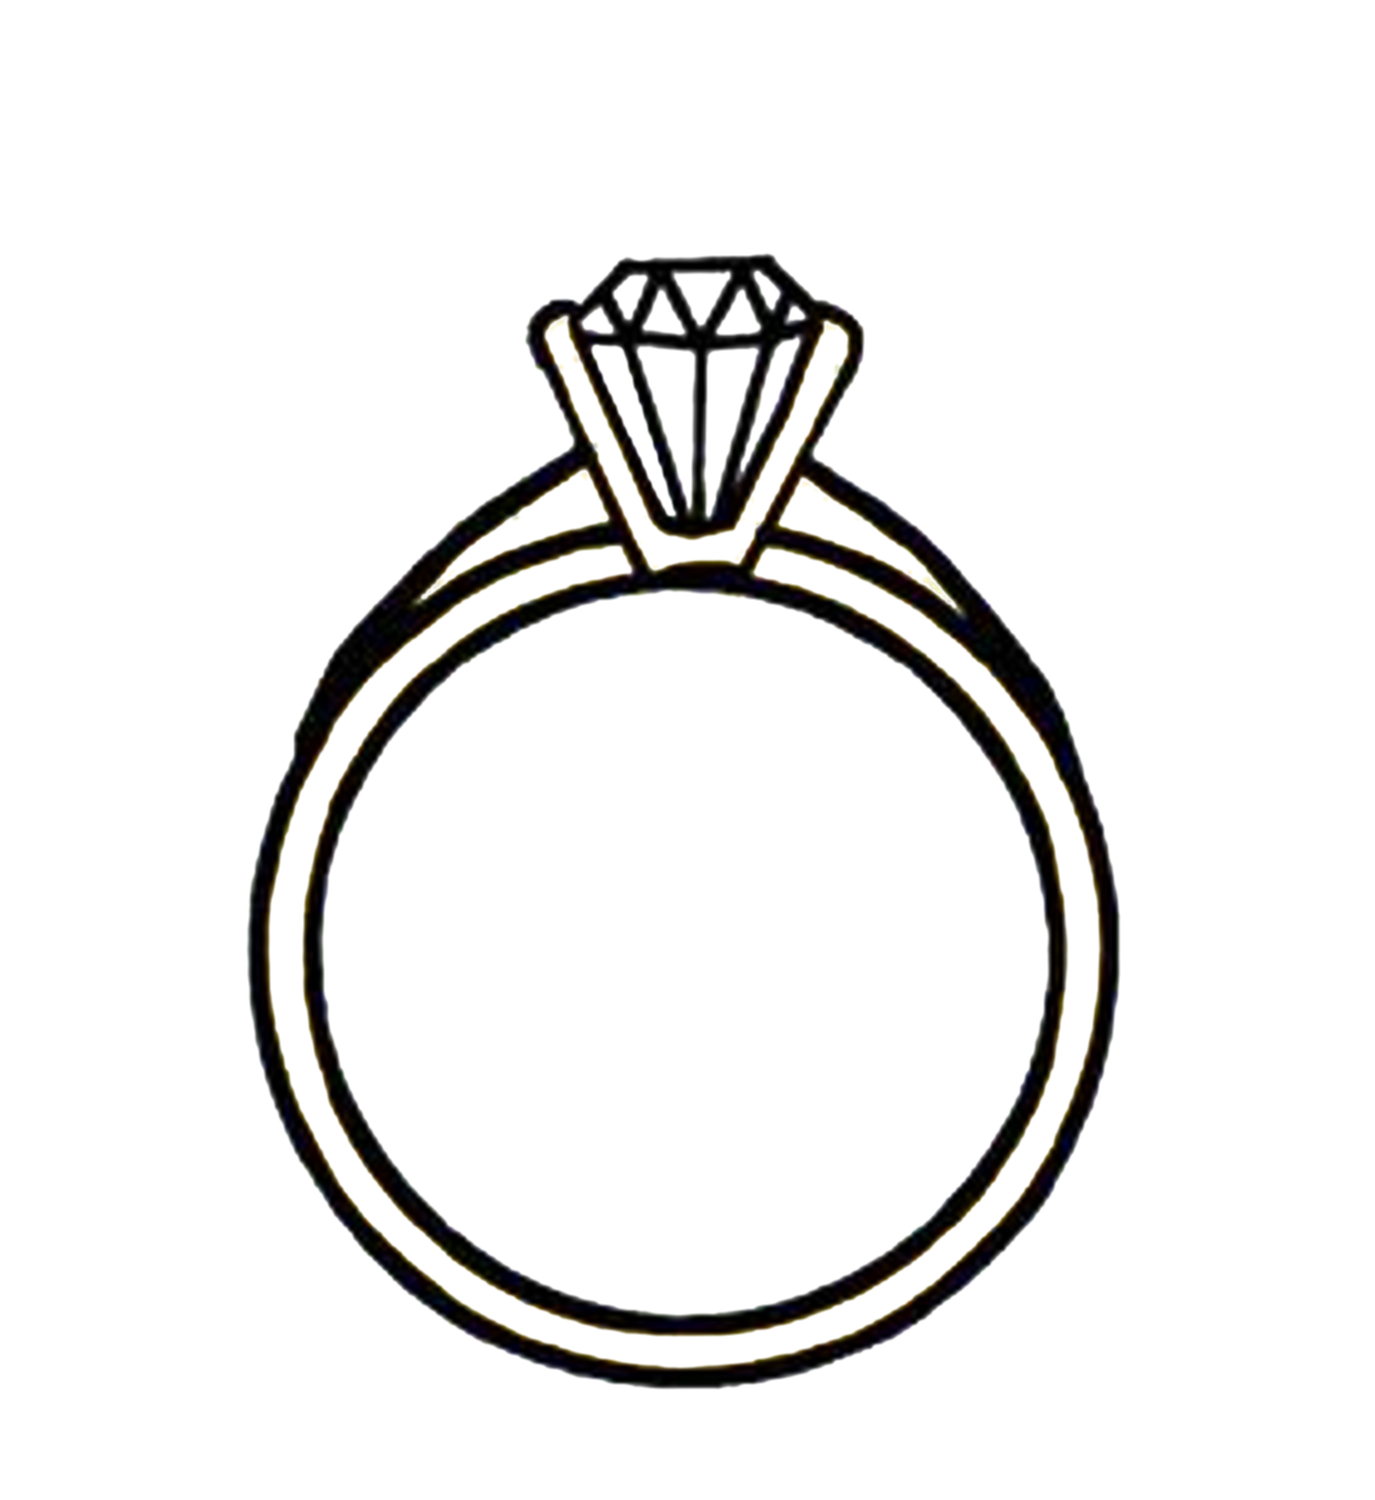 Linked Wedding Rings Clipart - Free Clipart Images